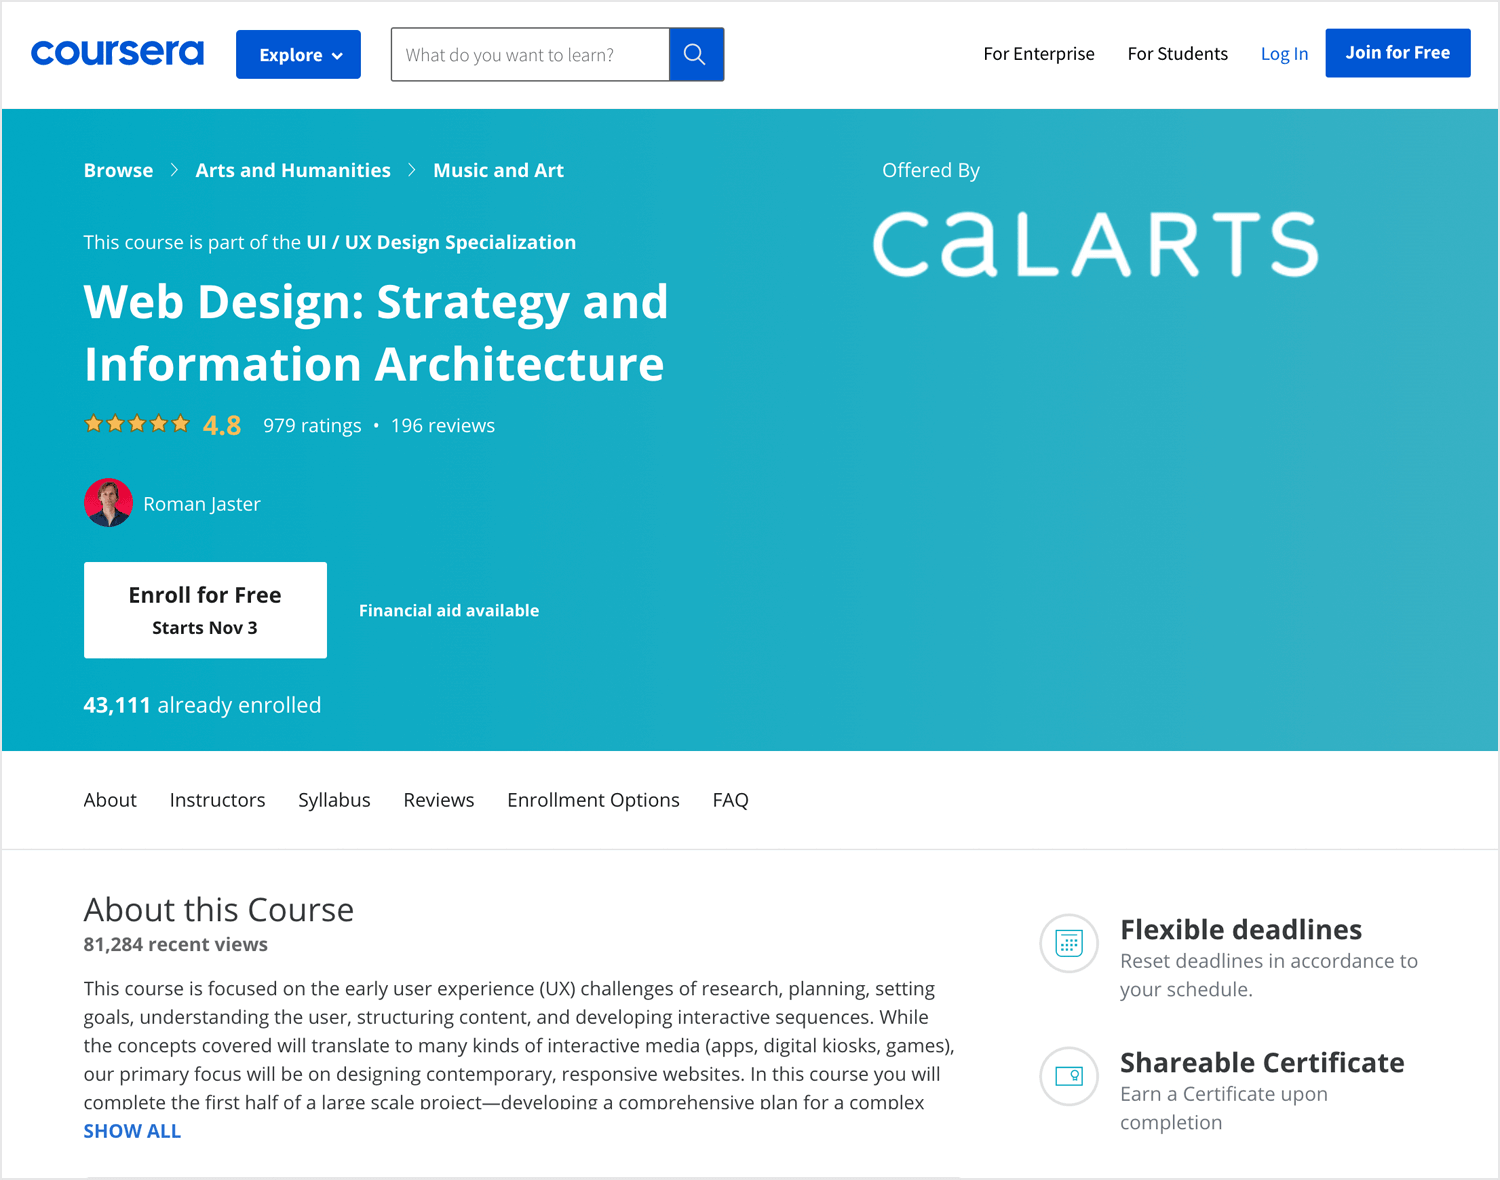 web design strategy course by coursera